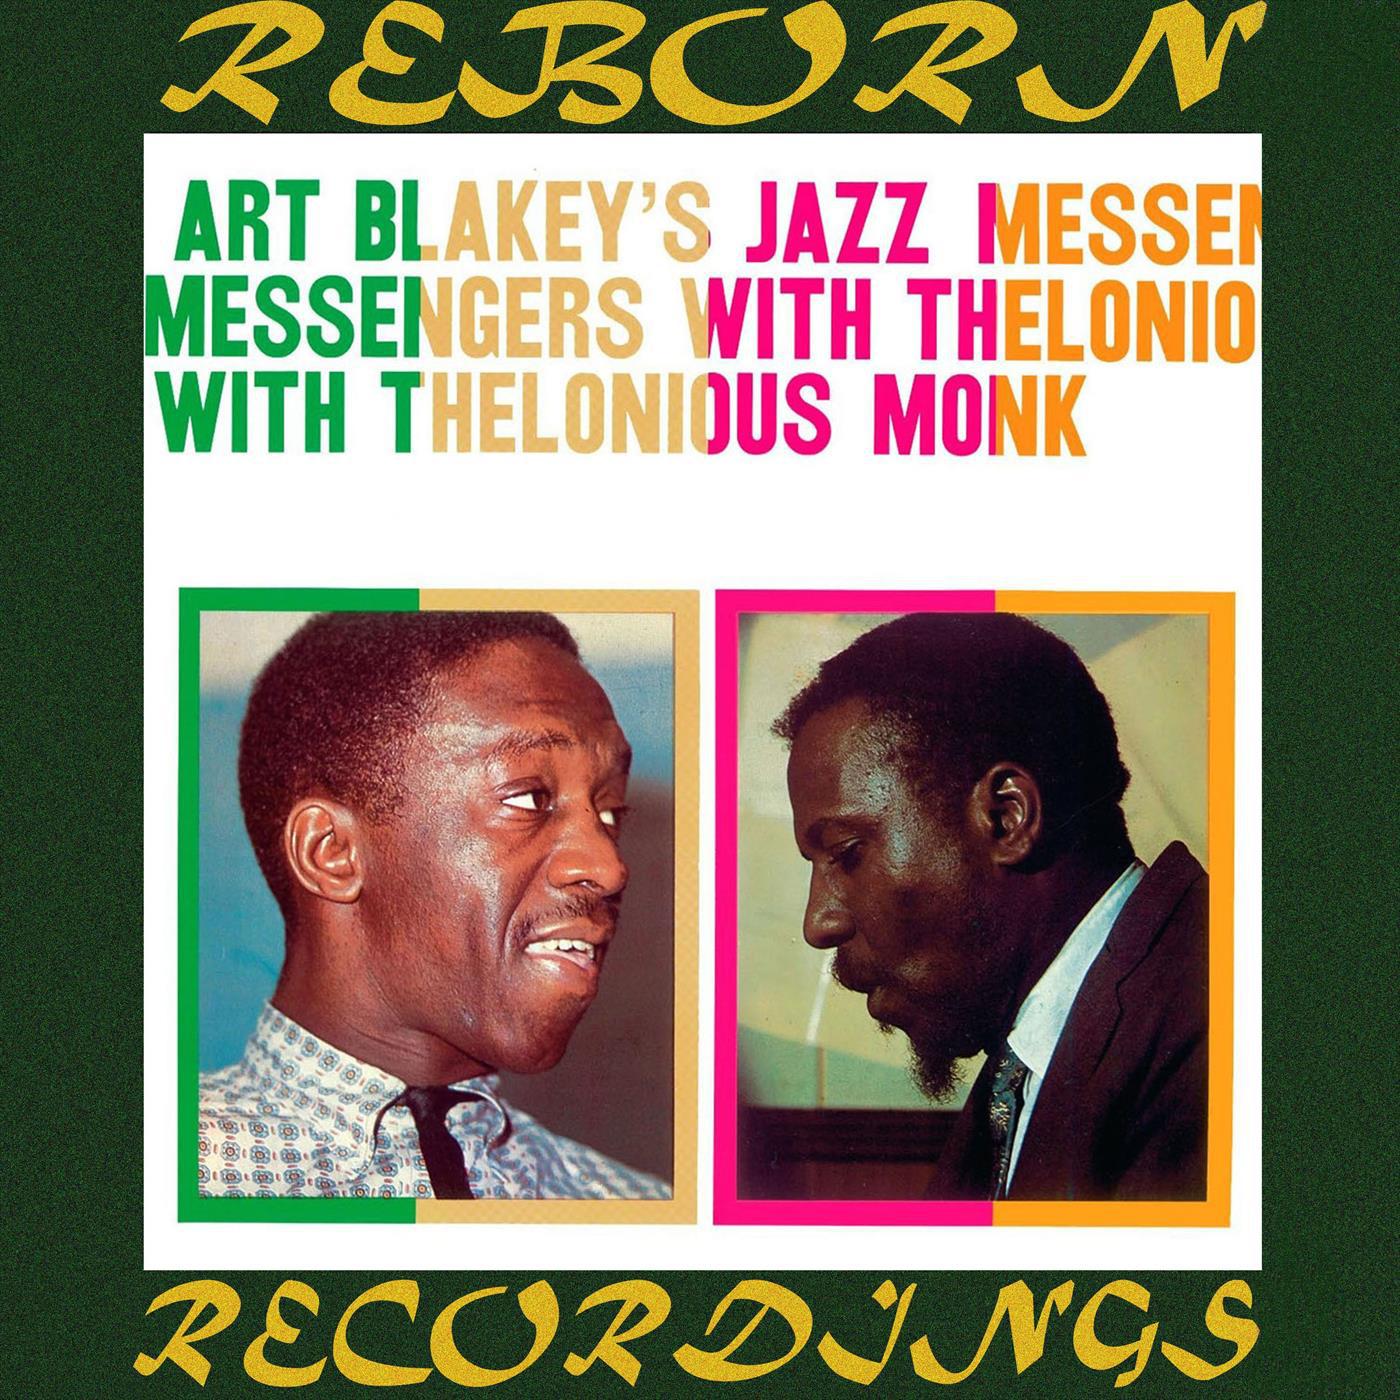 Art Blakey's Jazz Messengers With Thelonious Monk, The Complete Sessions (HD Remastered)